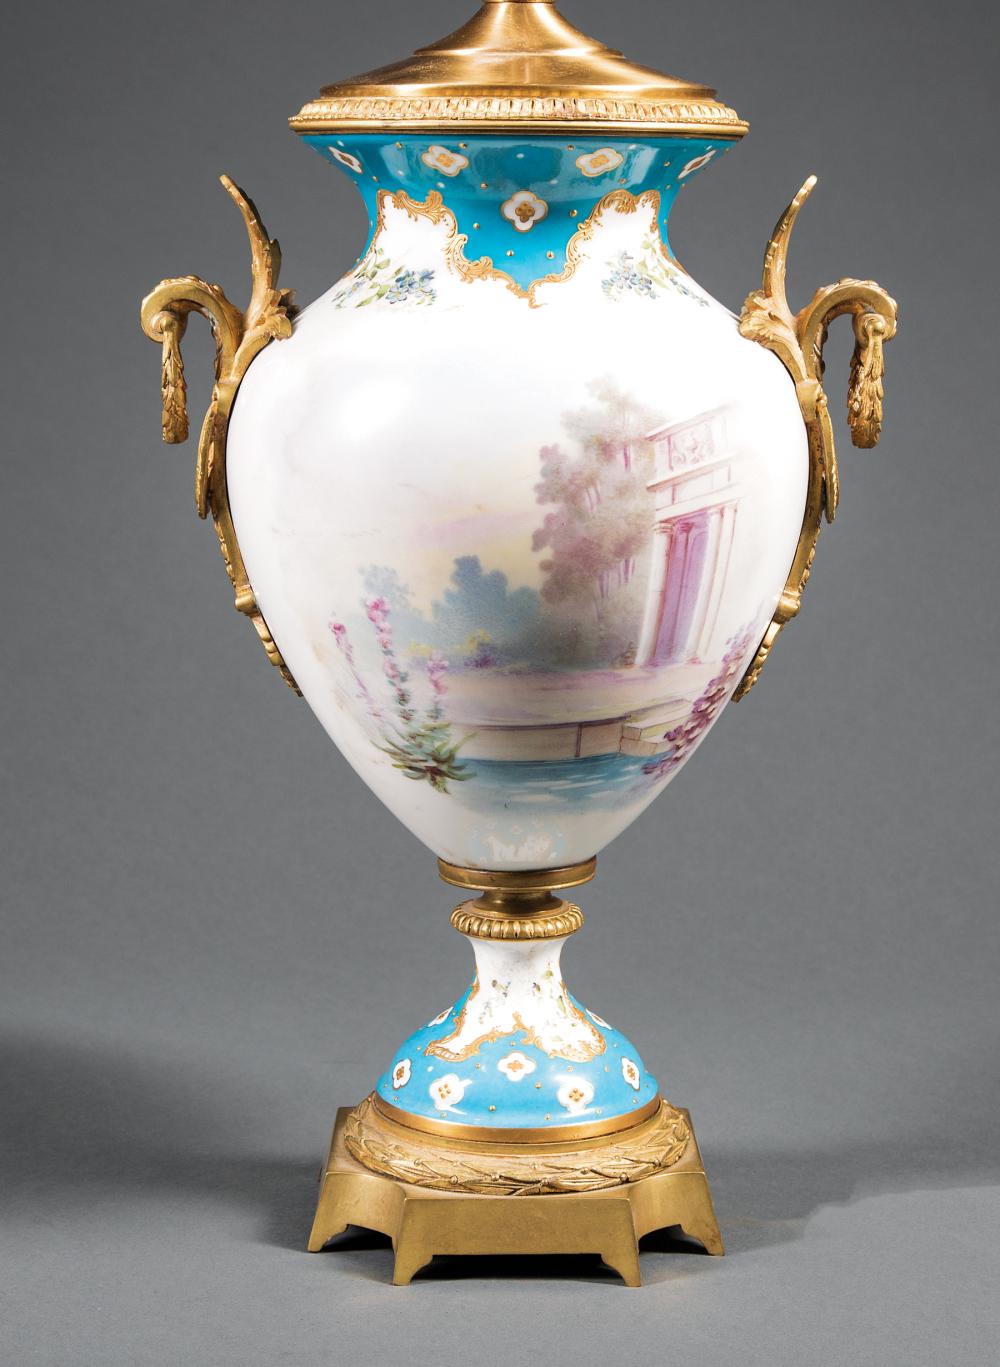 BRONZE-MOUNTED SEVRES-STYLE PORCELAIN